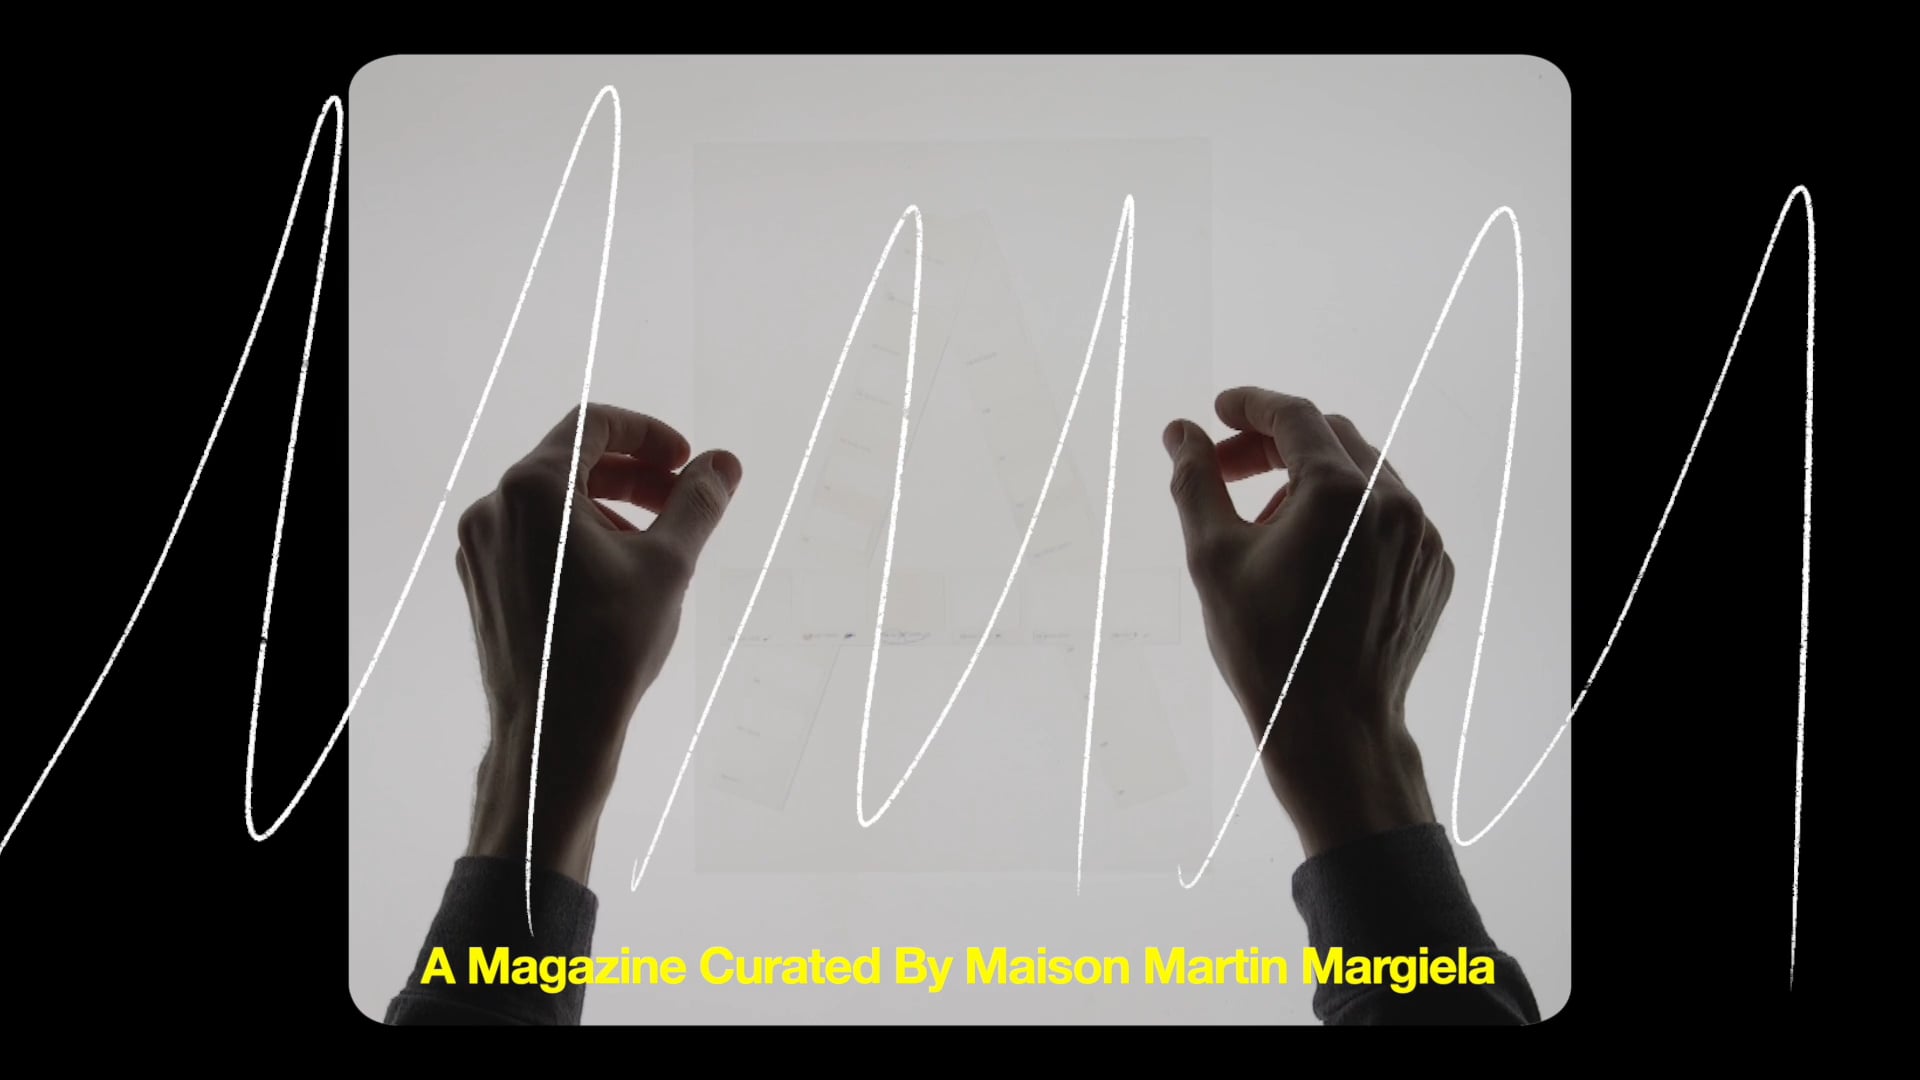 A Magazine Curated By Maison Martin Margiela (2004 - 2021)